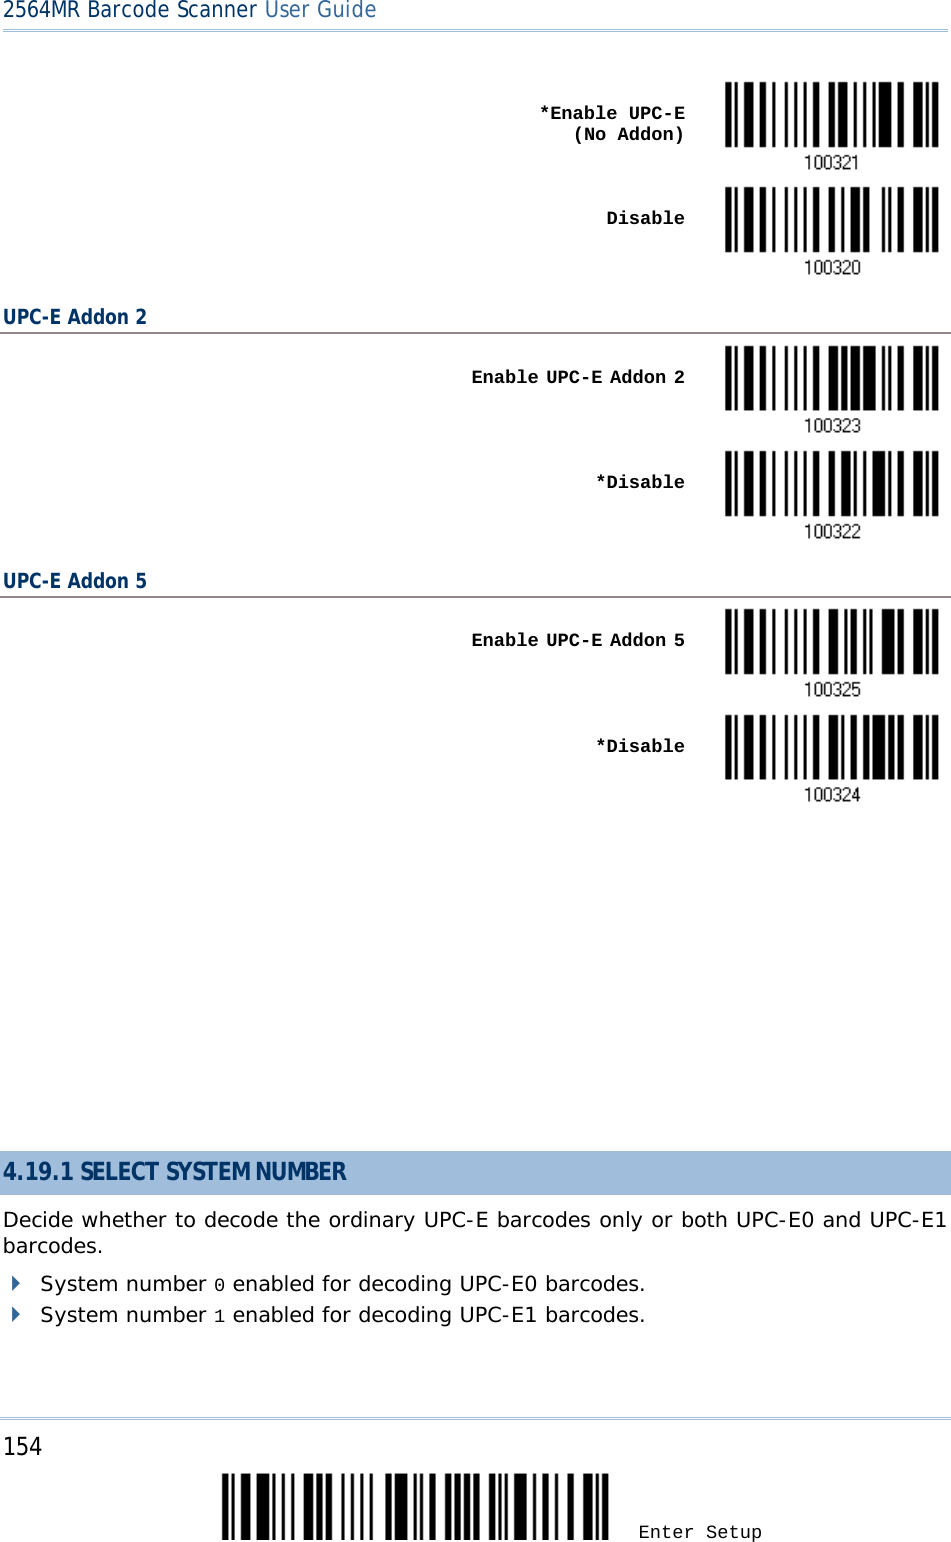 2564MR Barcode Scanner User Guide     *Enable UPC-E     (No Addon)     Disable  UPC-E Addon 2    Enable UPC-E Addon 2     *Disable  UPC-E Addon 5    Enable UPC-E Addon 5     *Disable           4.19.1 SELECT SYSTEM NUMBER Decide whether to decode the ordinary UPC-E barcodes only or both UPC-E0 and UPC-E1 barcodes.  System number 0 enabled for decoding UPC-E0 barcodes.  System number 1 enabled for decoding UPC-E1 barcodes.  154 Enter Setup 